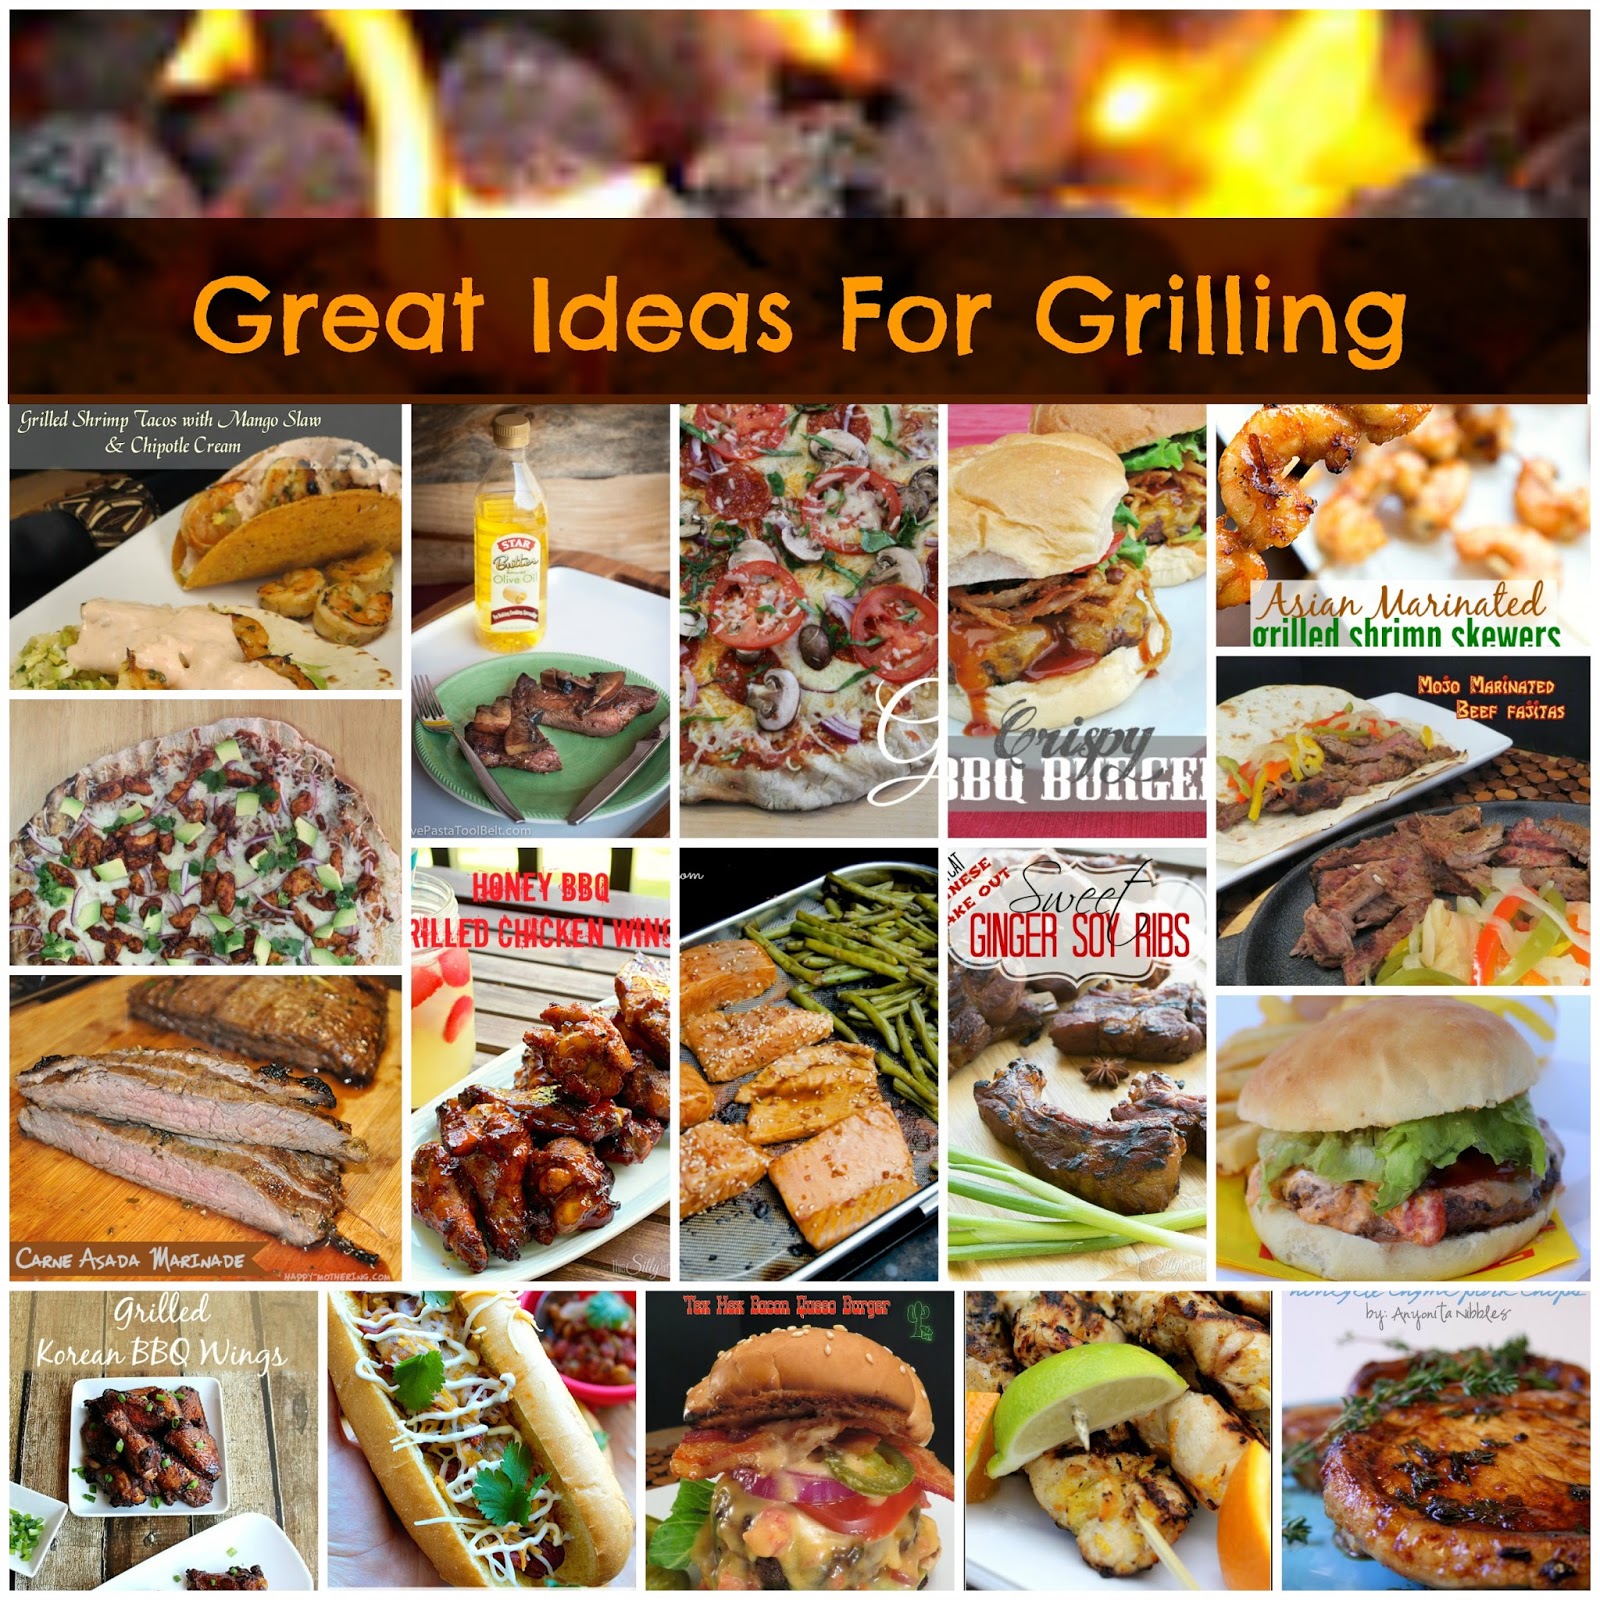 17 Great Ideas for Grilling:  A roundup or 17 recipes to cook on the grill for Memorial Day or anytime you feel like grilling.  From the archives of Great Idea Thursdays.